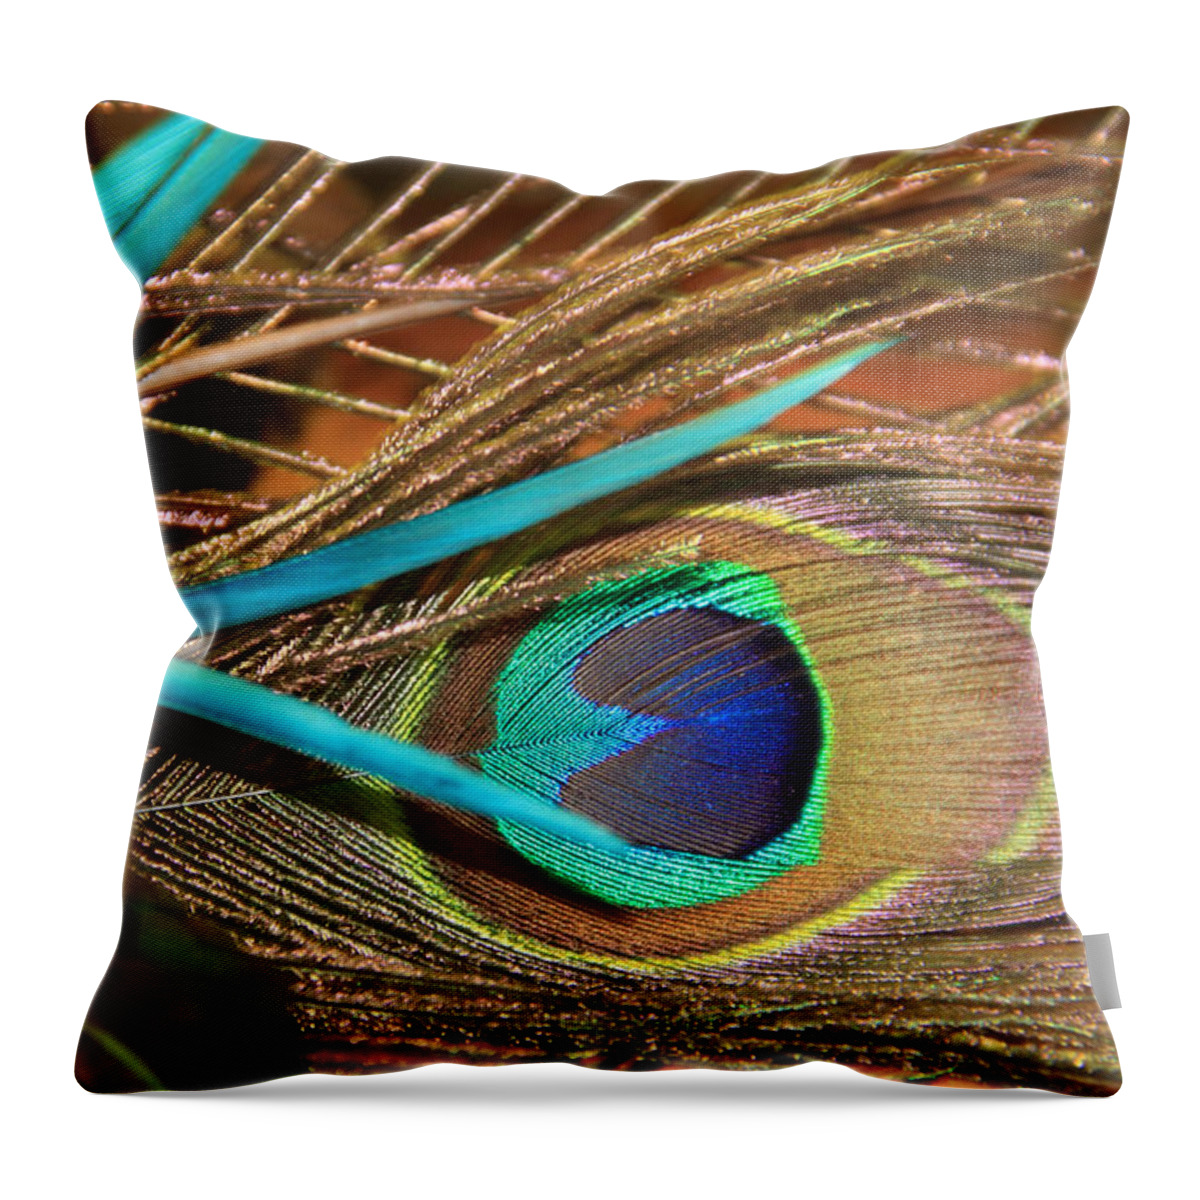 Peacock Throw Pillow featuring the photograph Many Feathers by Angela Murdock